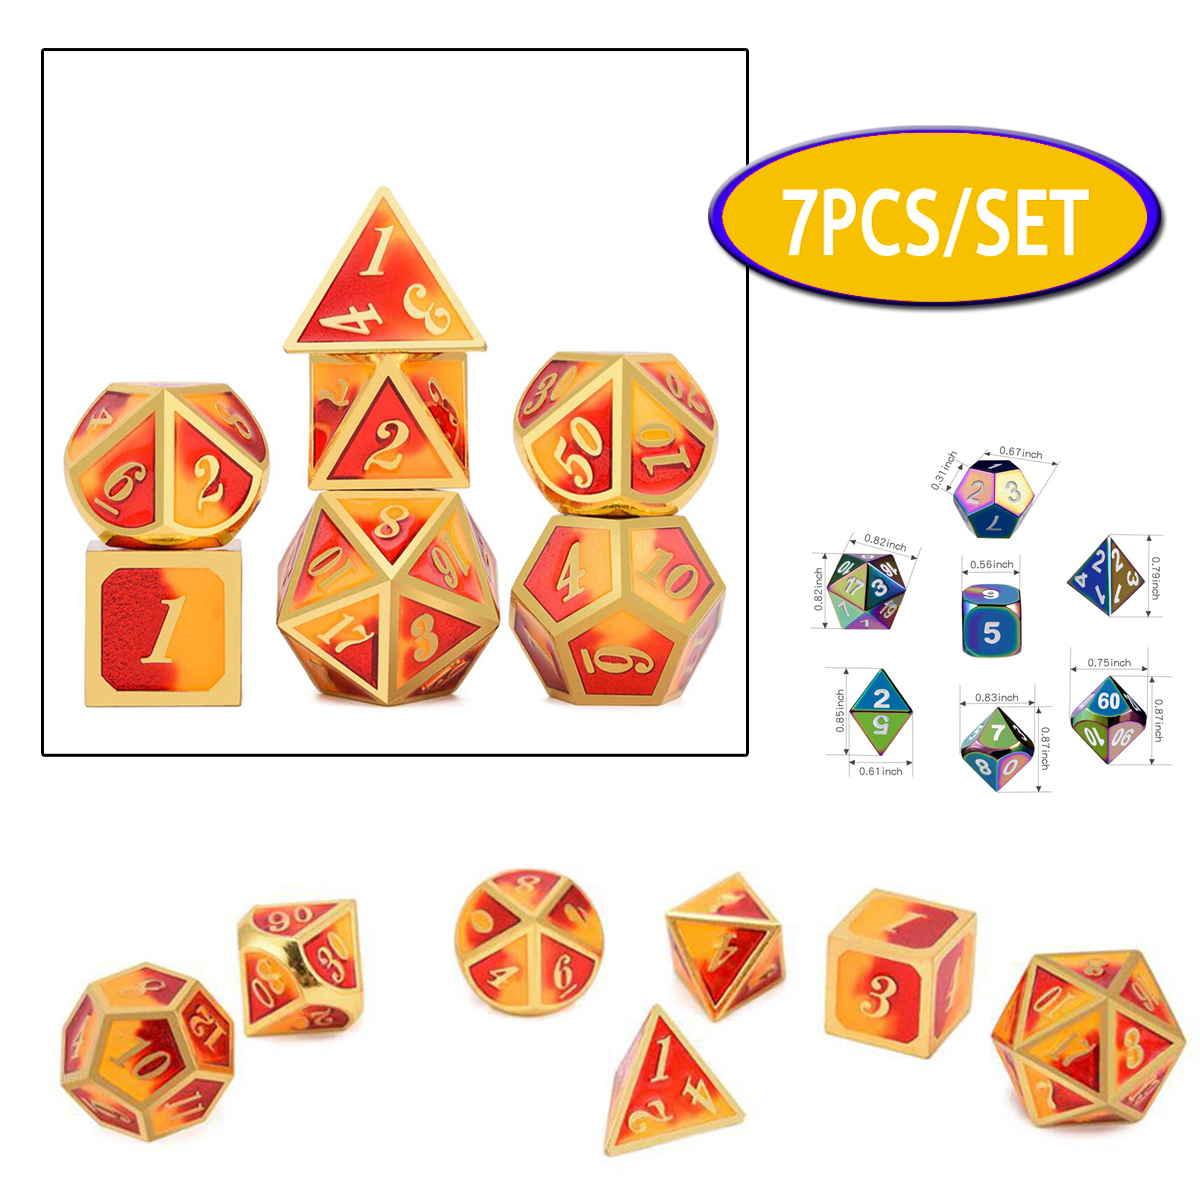 7PCSSET-Creative-Metal-Multi-faced-Dice-Set-Heavy-Duty-Polyhedral-Dices-Role-Playing-Game-Party-Game-1584212-5